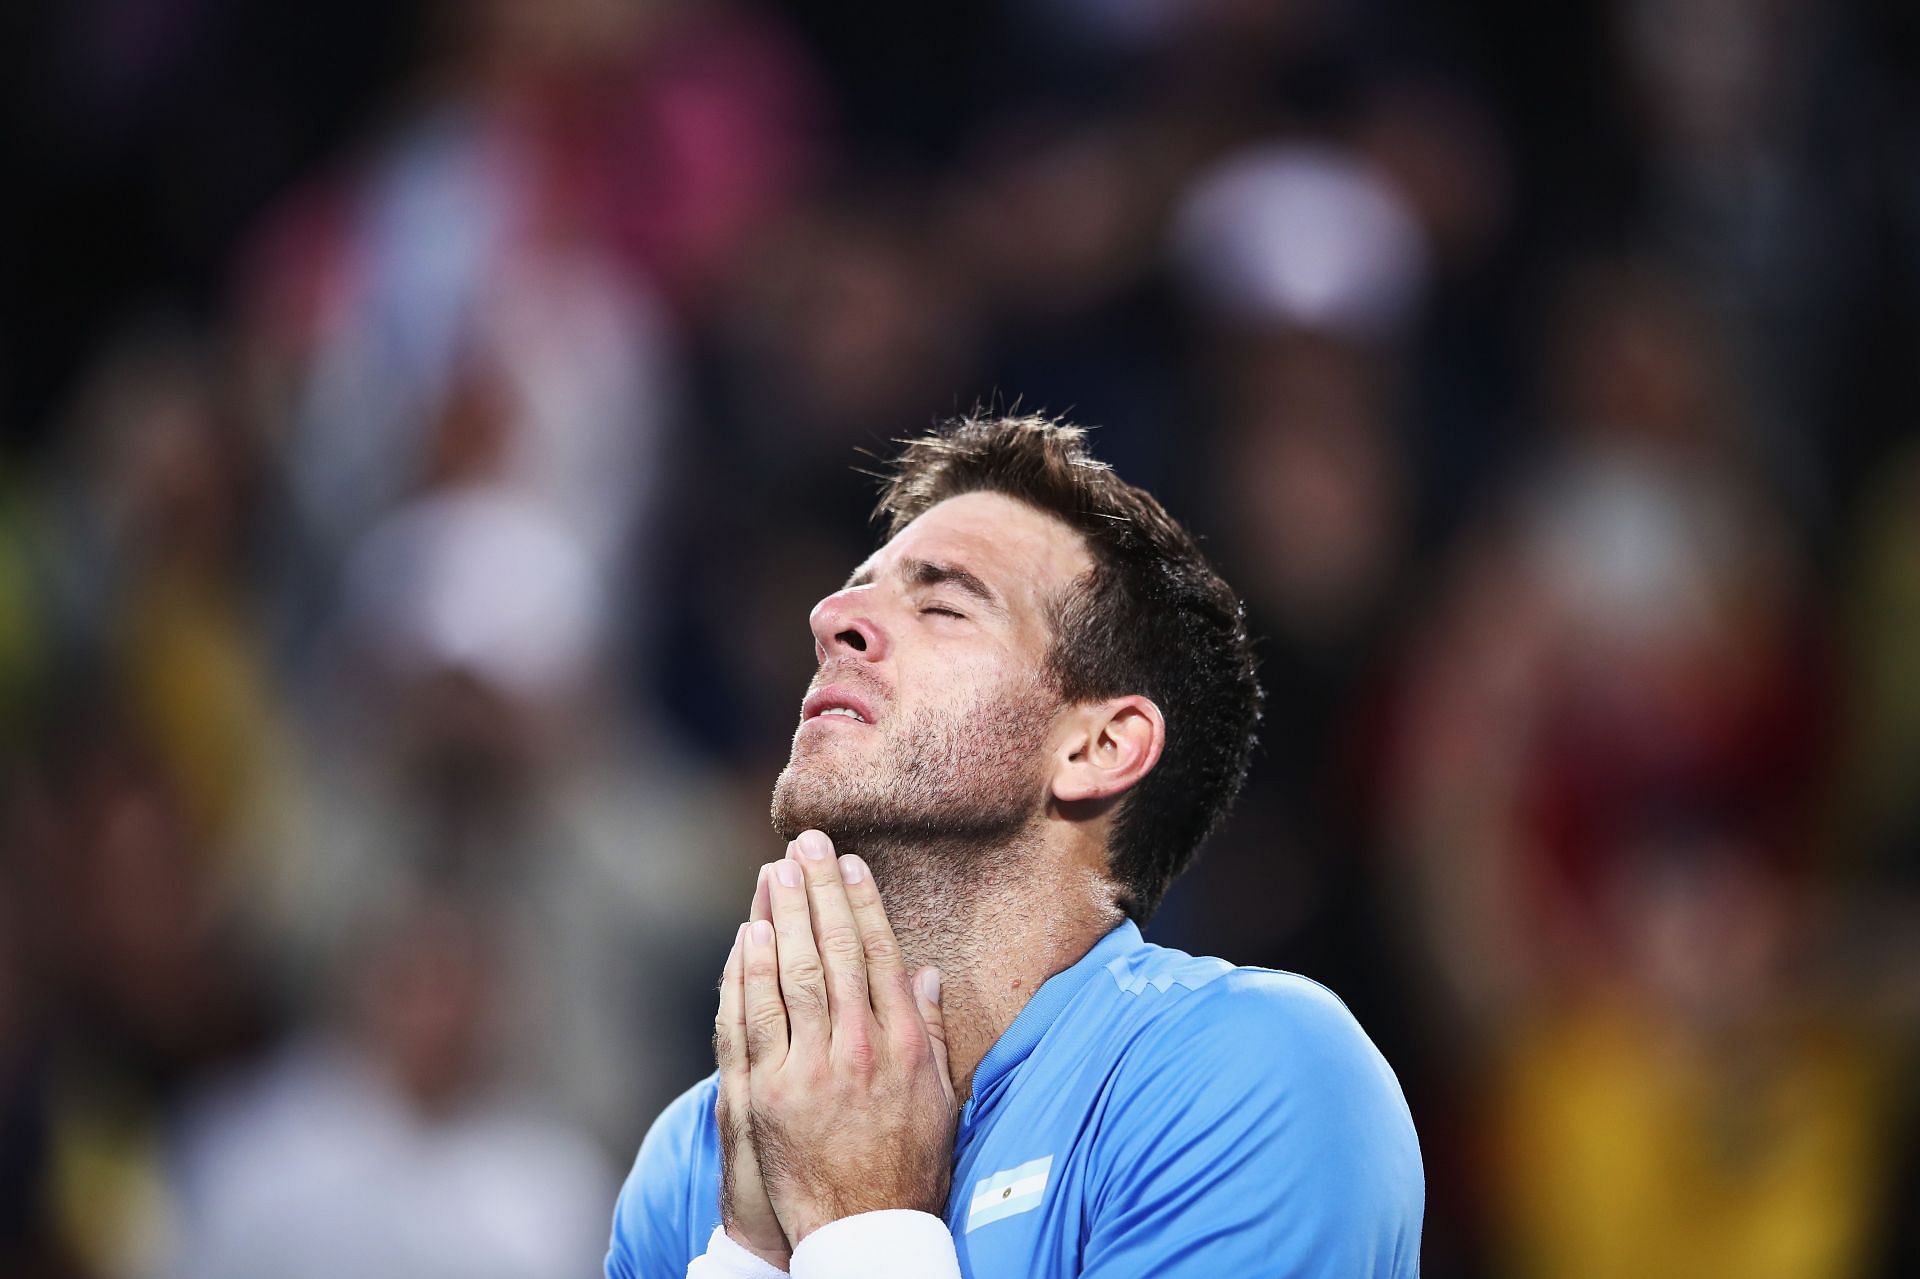 Juan Martin del Potro has been sidelined because of injuries.